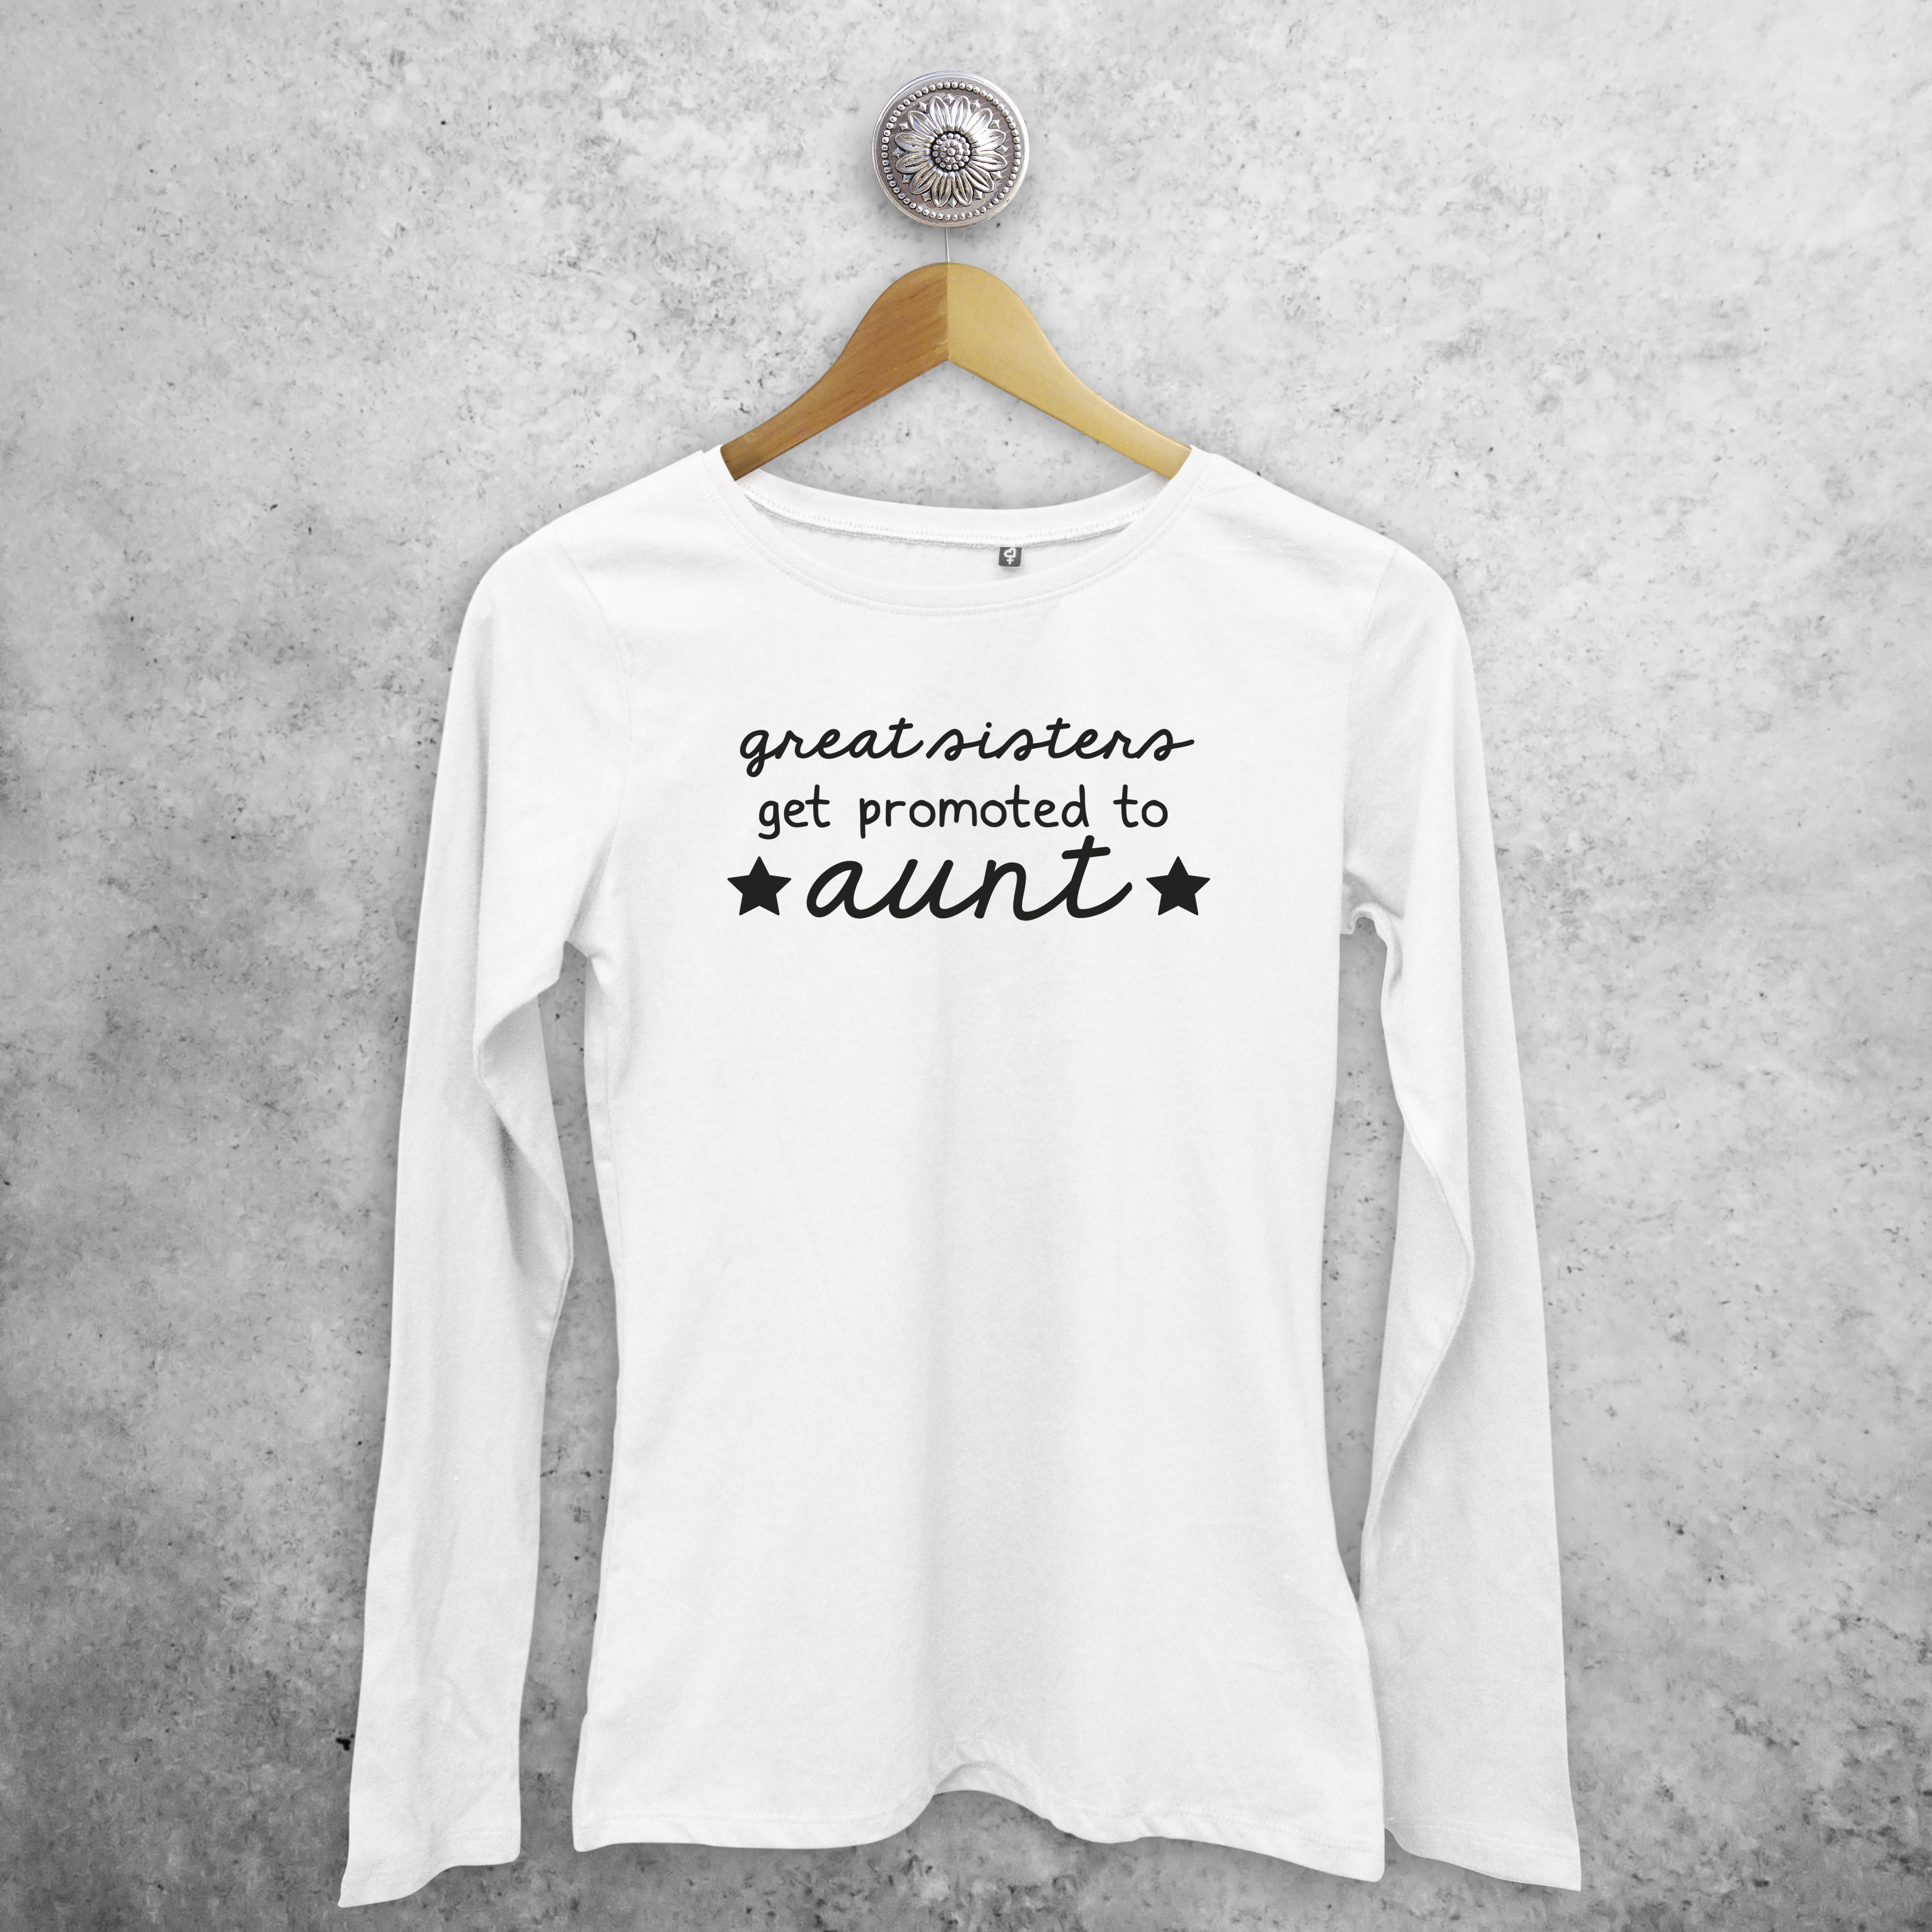 'Great sisters get promoted to aunt' adult longsleeve shirt